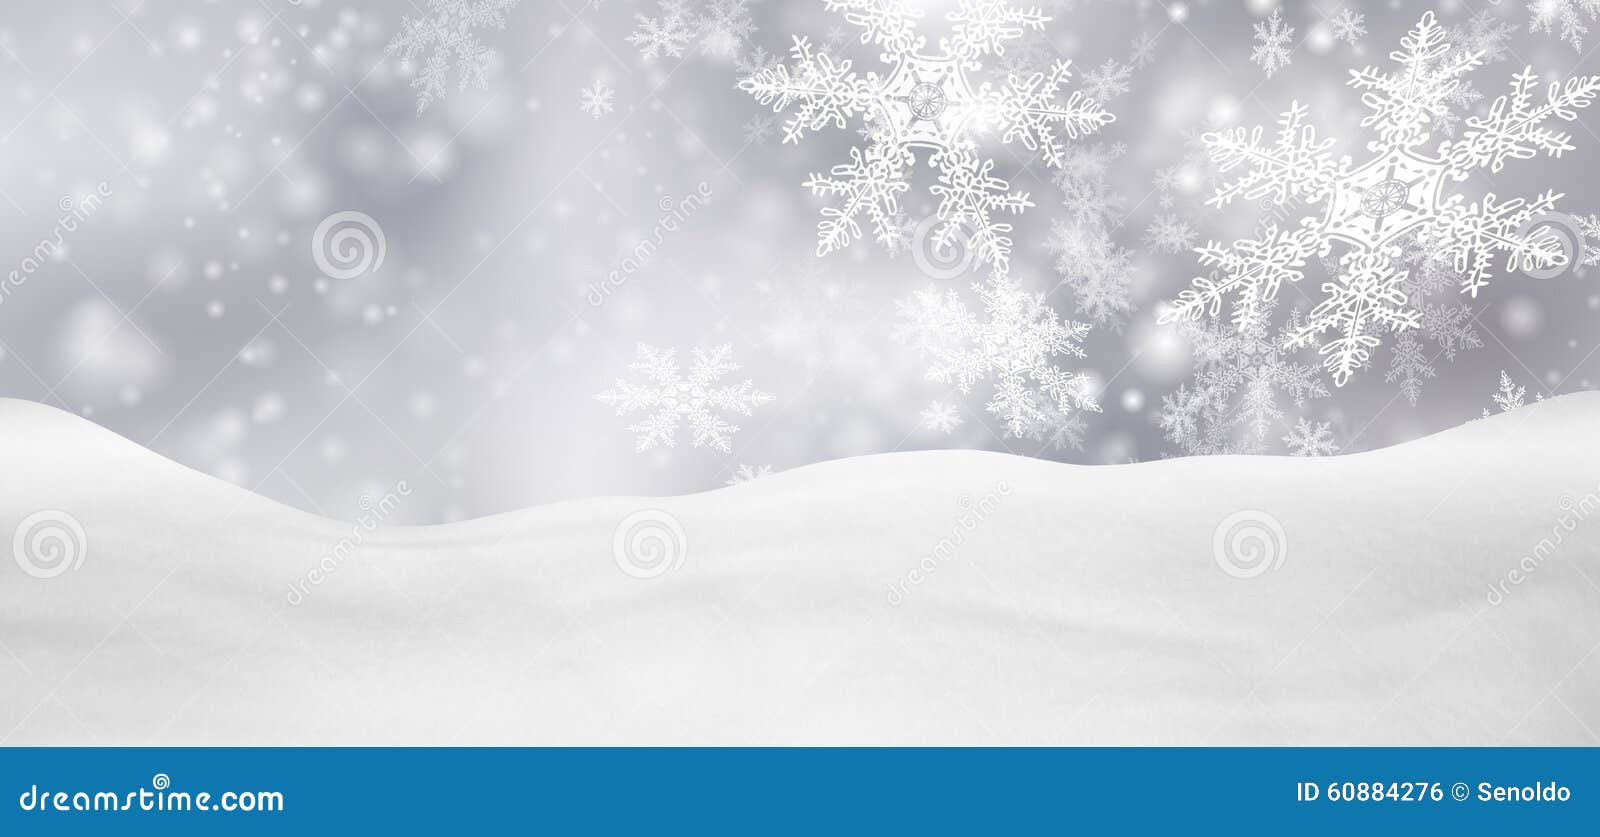 abstract silver background panorama winter landscape with falling snowflakes